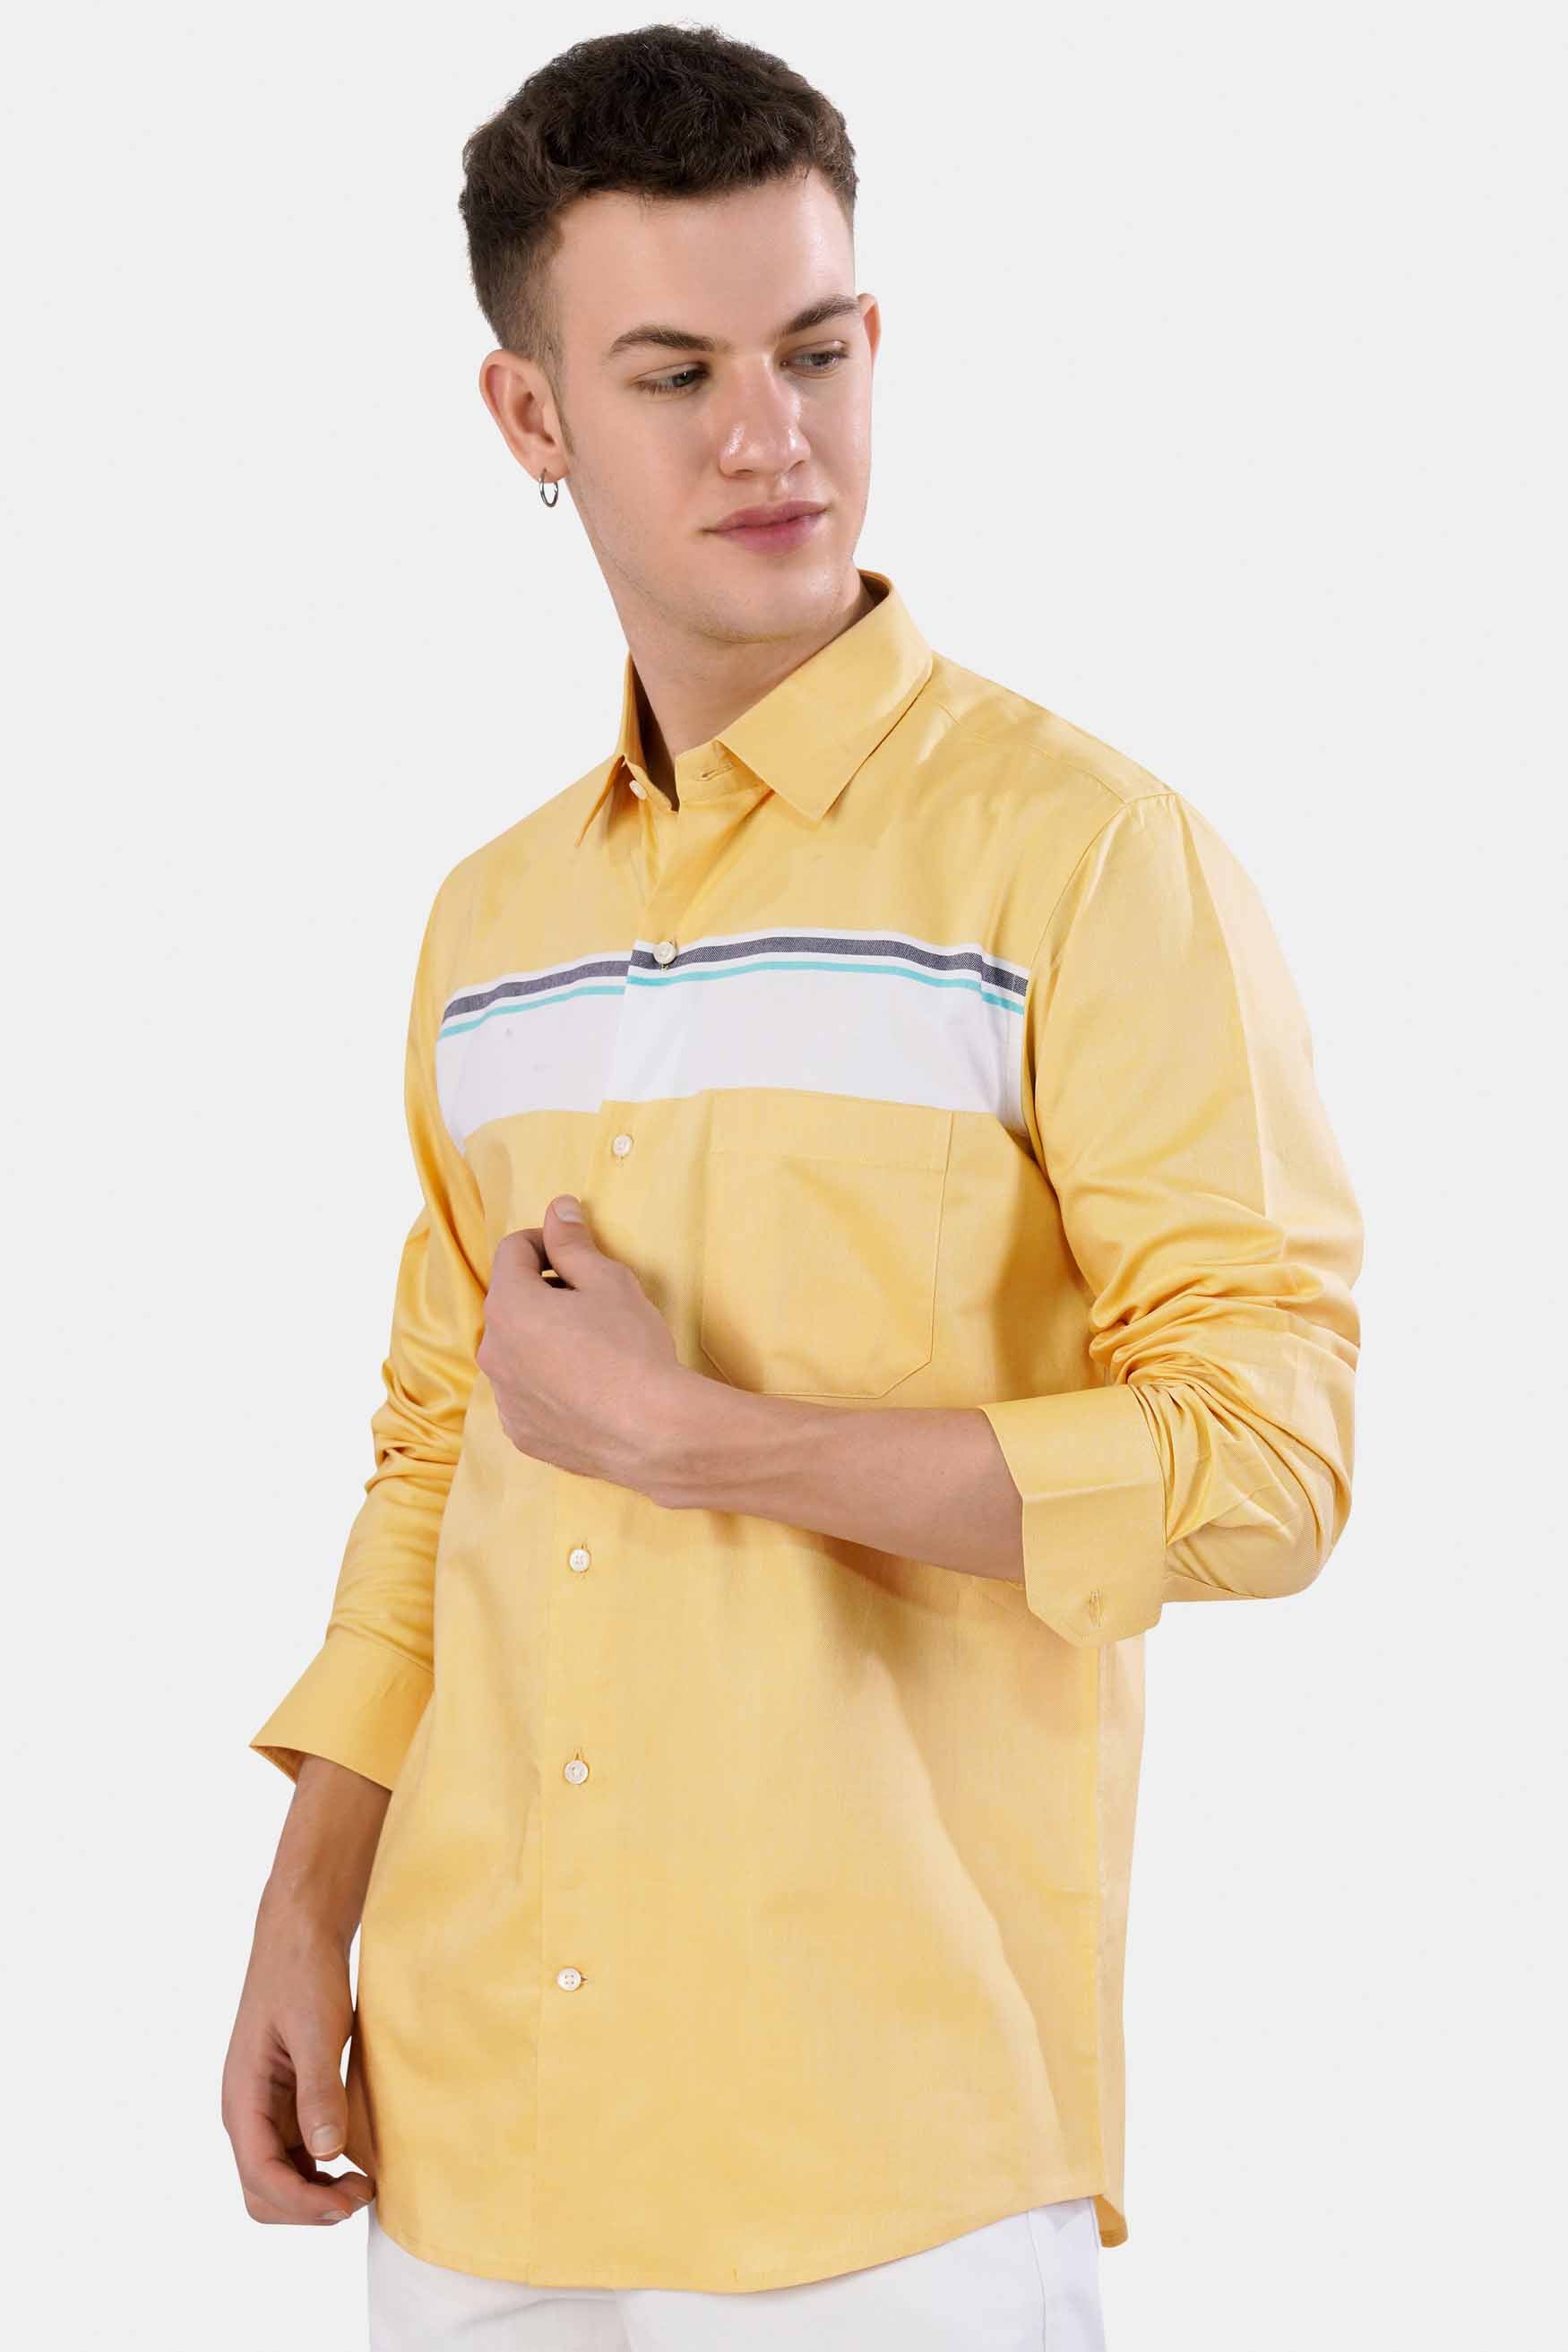 Flax Yellow with Bright White Royal Oxford Shirt